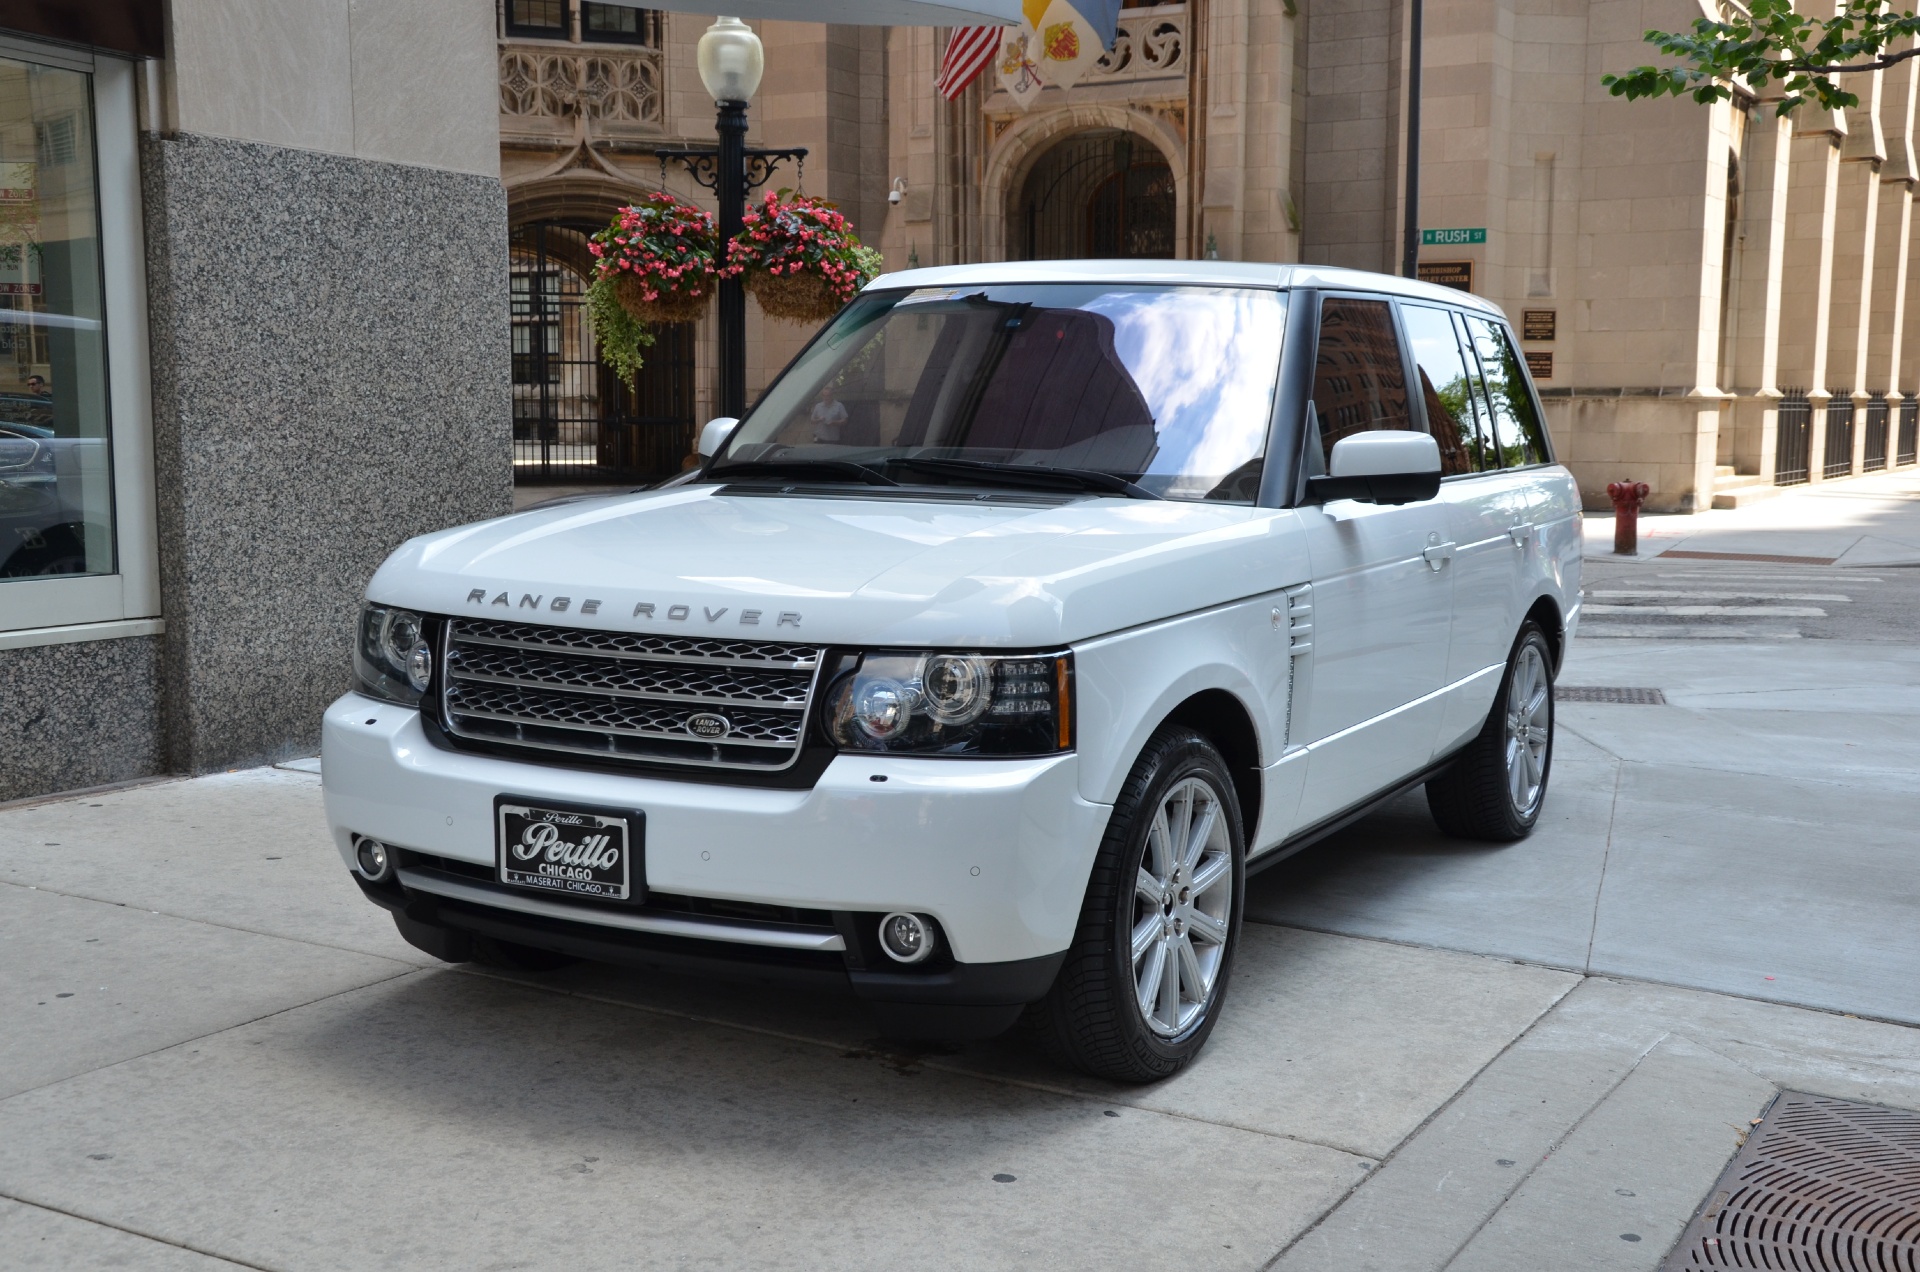 2012 Land Rover Range Rover Supercharged Stock # GC1749 for sale near ...